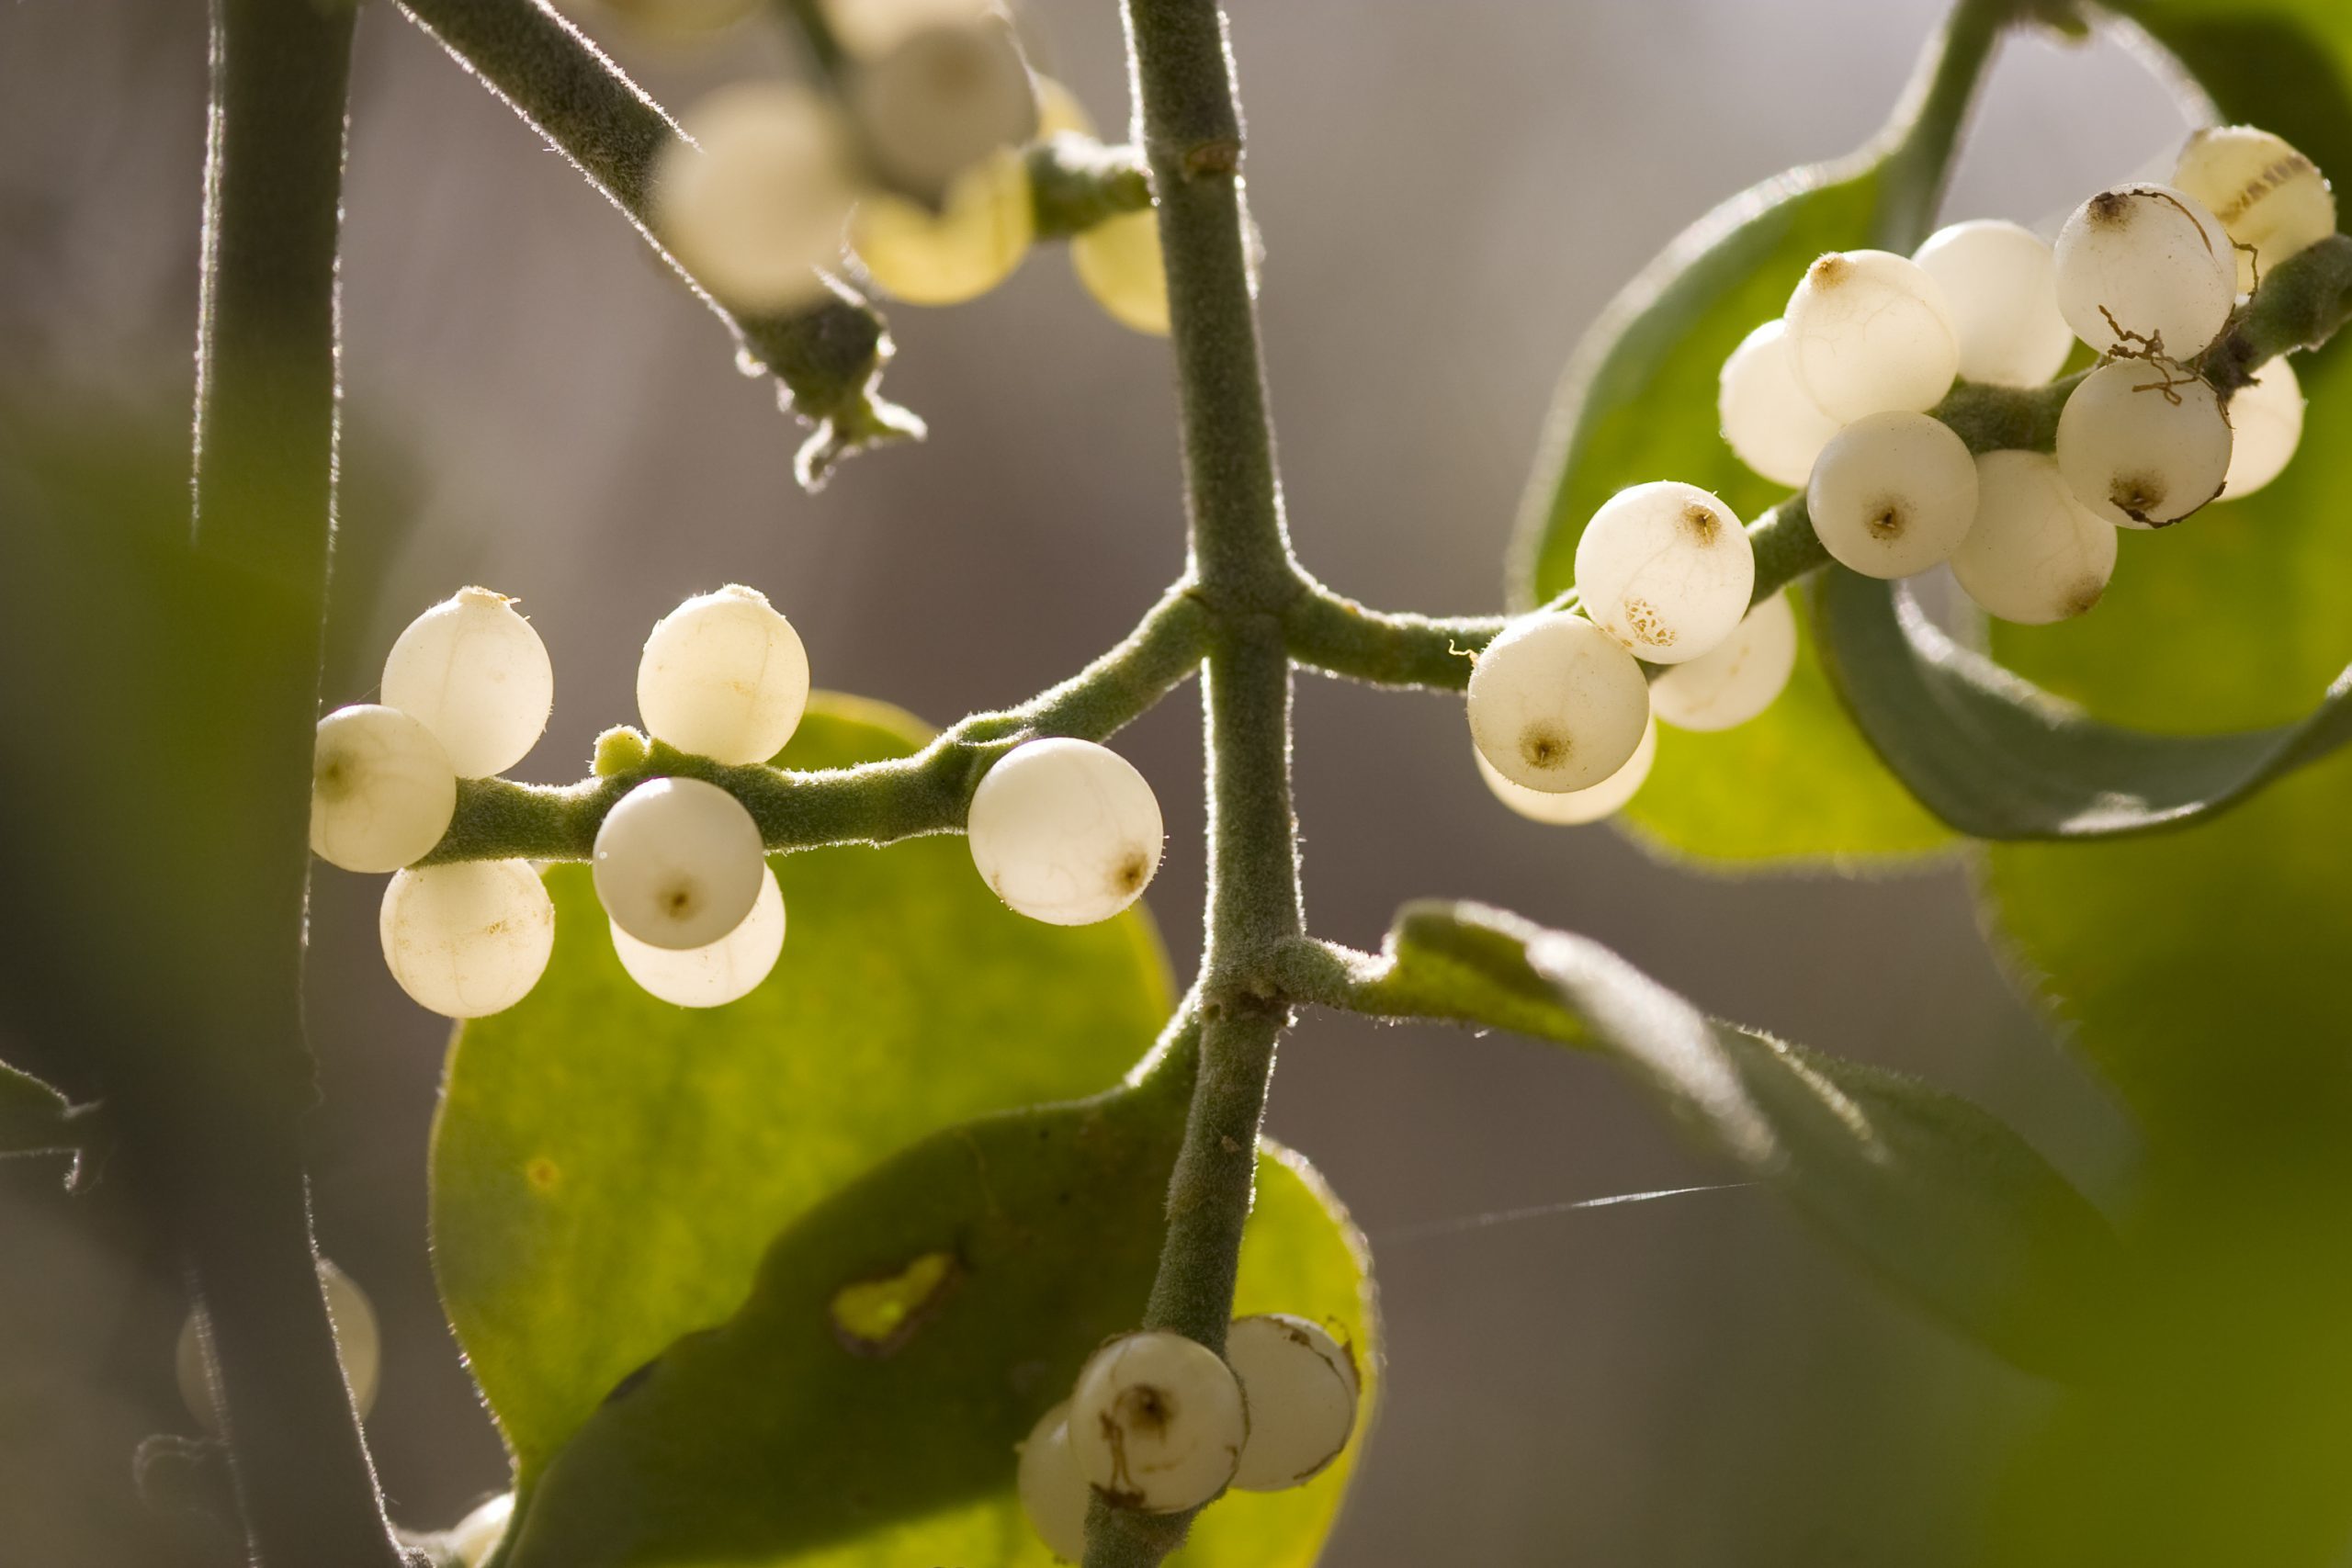 Is Mistletoe Poisonous for People and Pets?